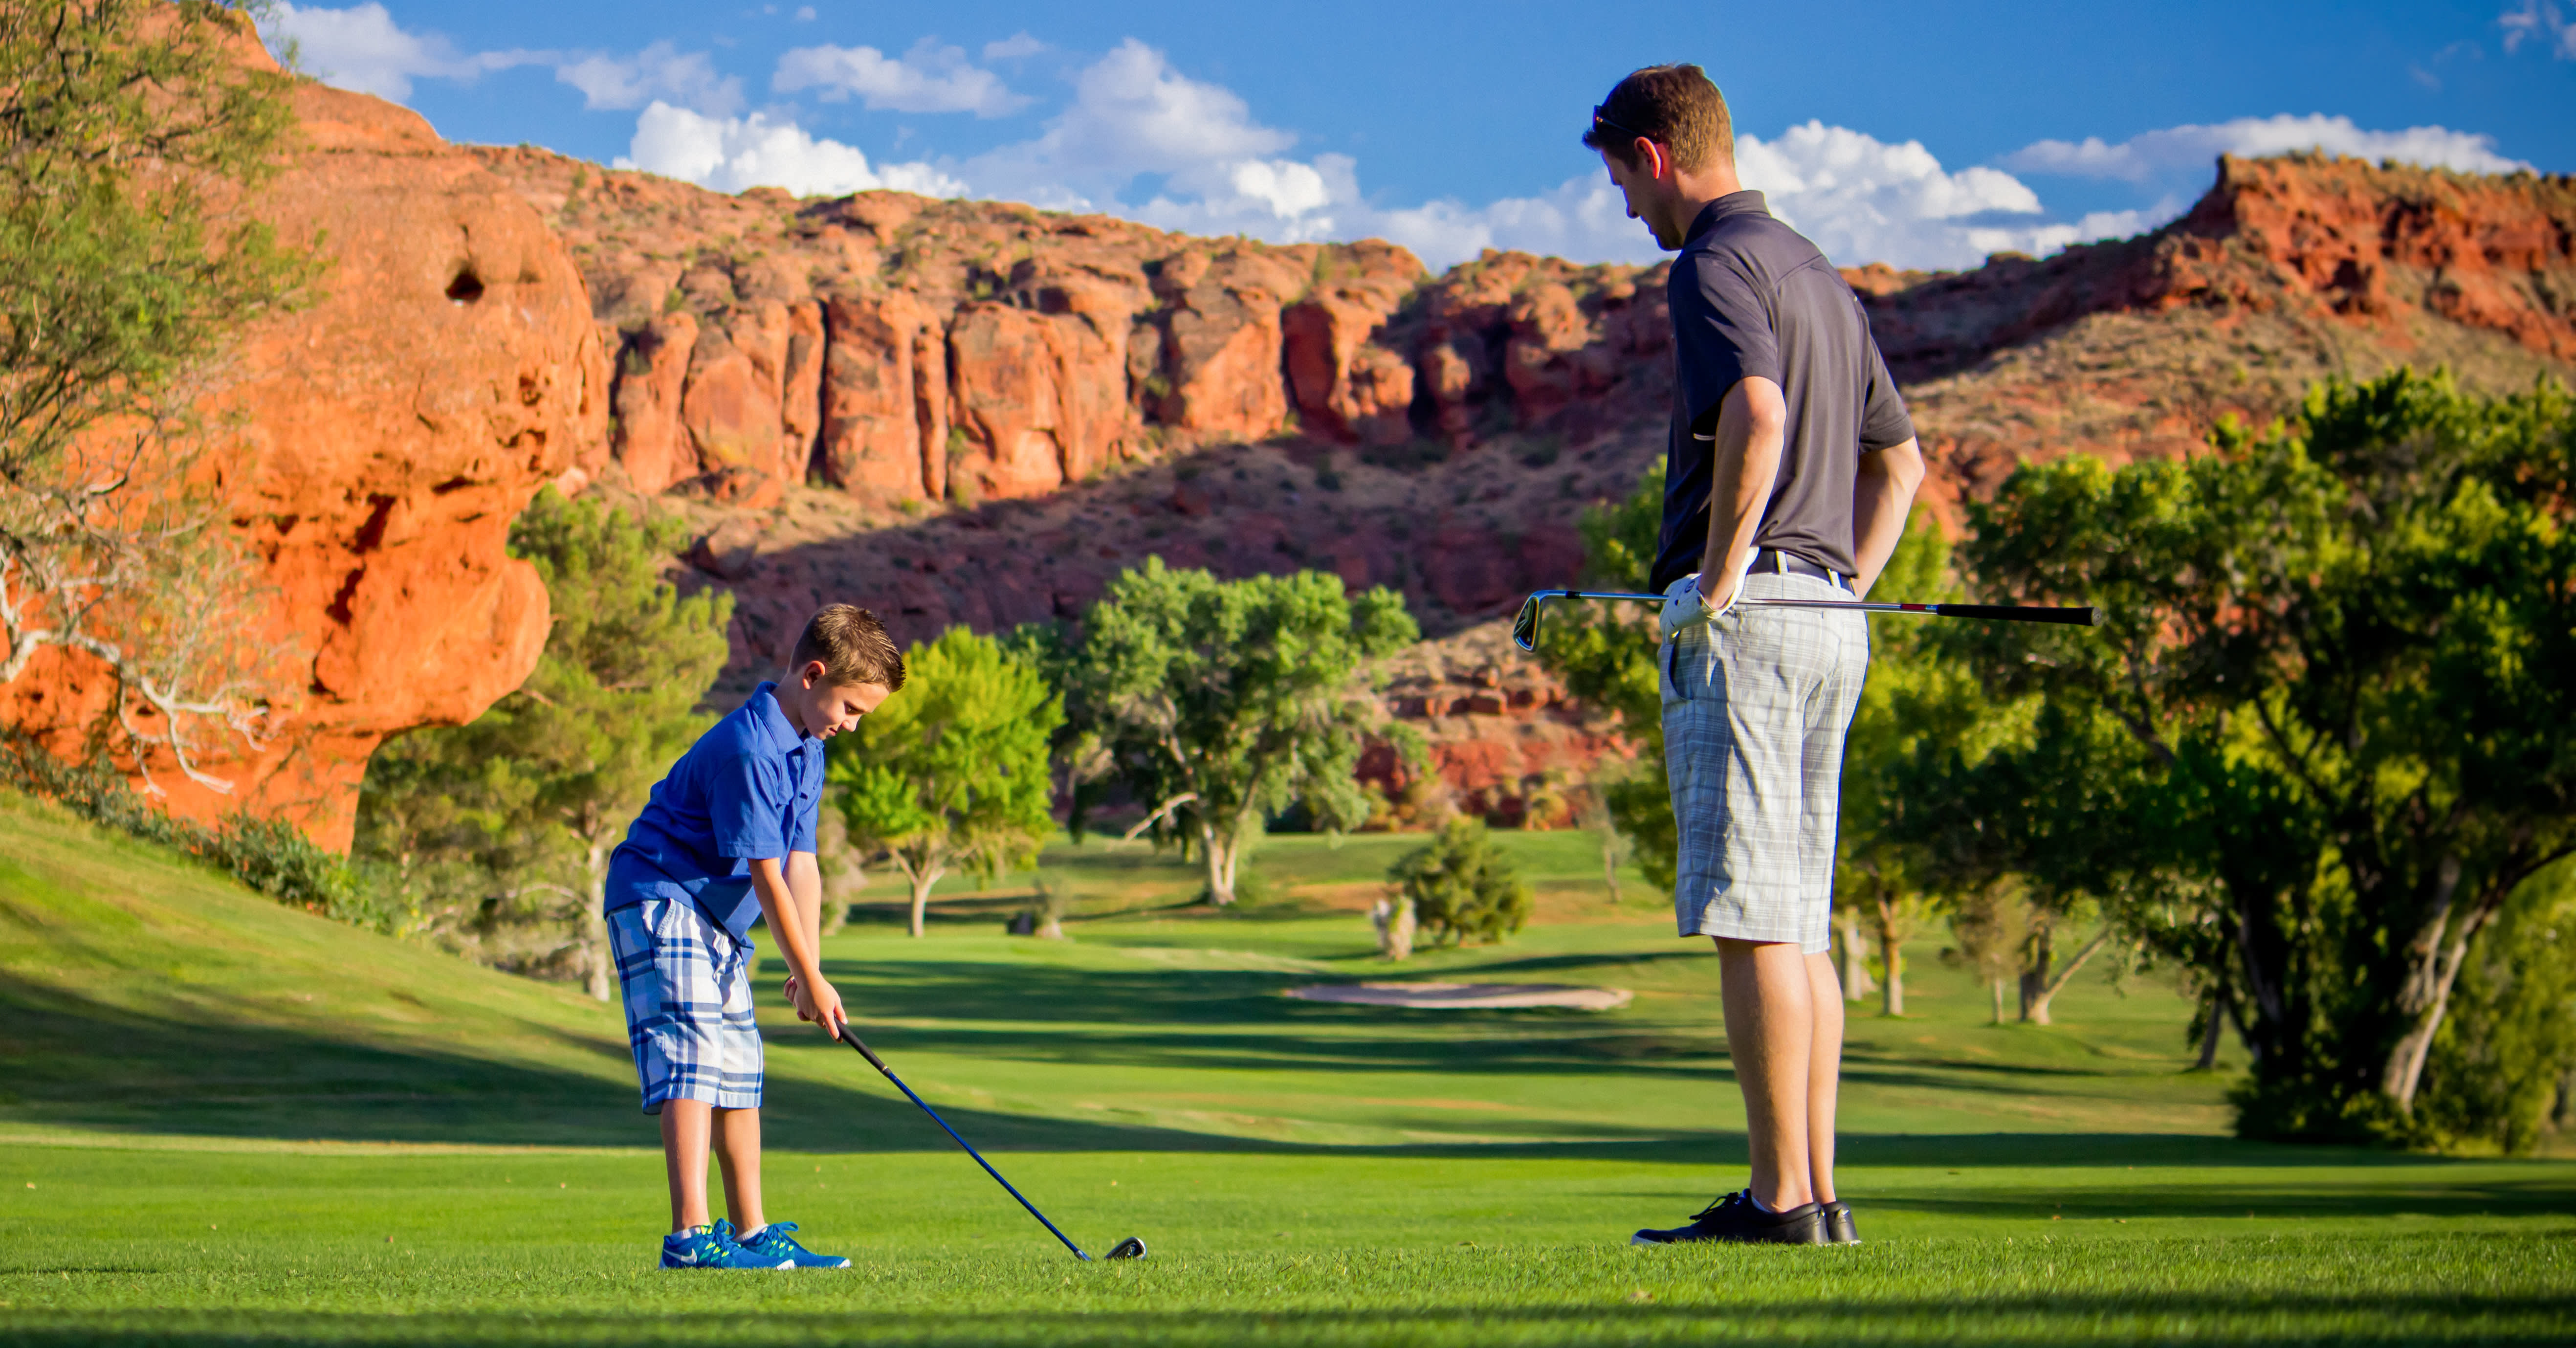 dixie-red-hills-golf-course-father-son-045 copy